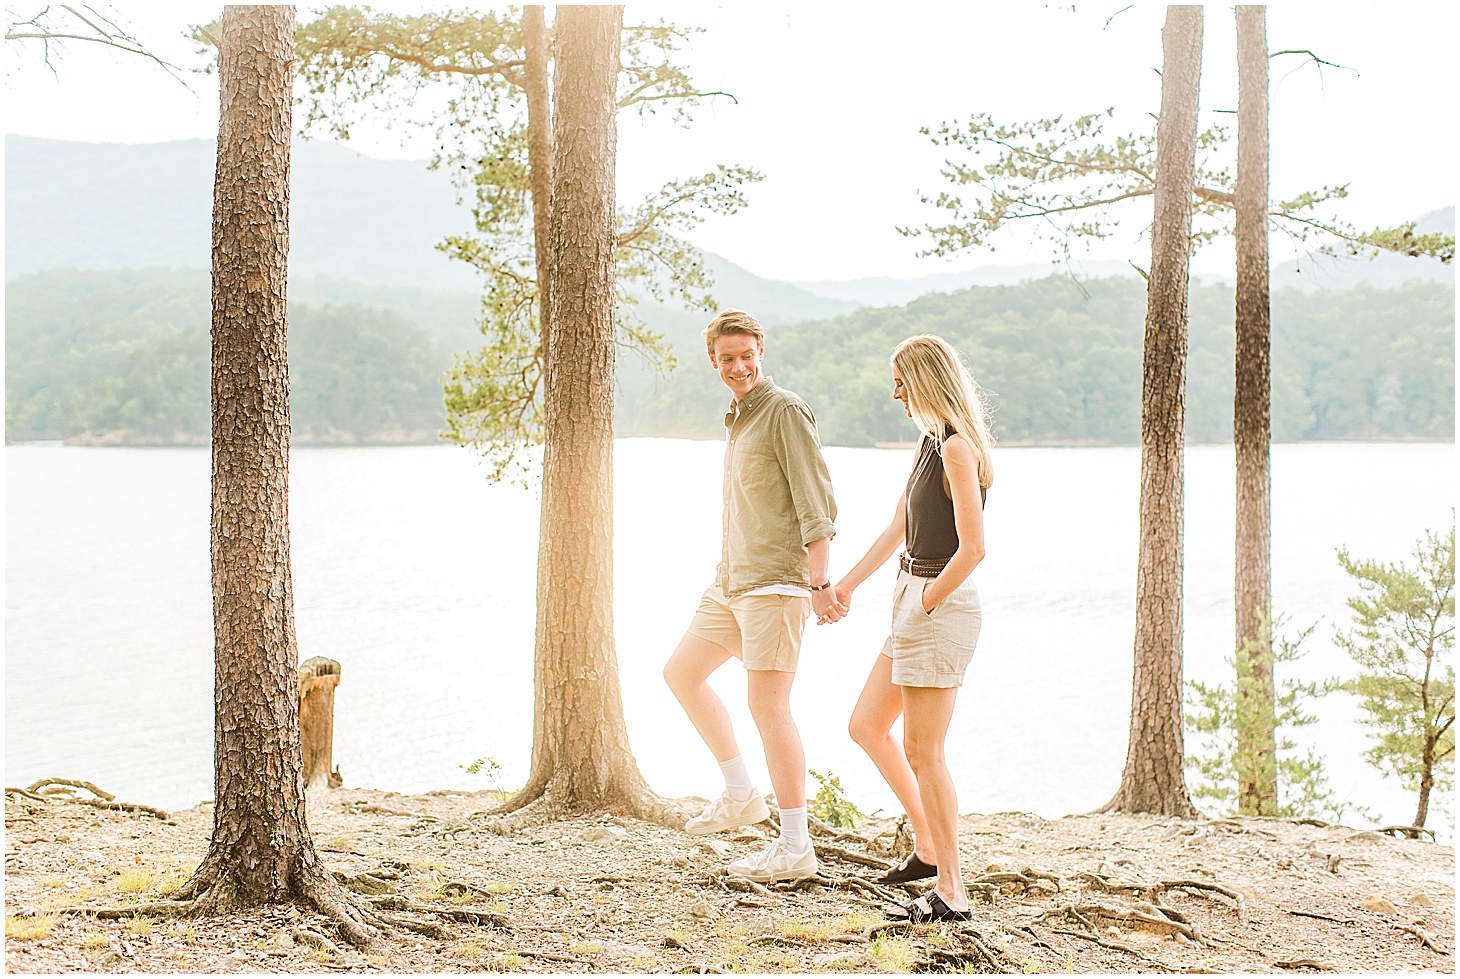 carvinscove_roanokeengagementsession_virginiaweddingphotographer_vaweddingphotographer_photo_0037-1.jpg